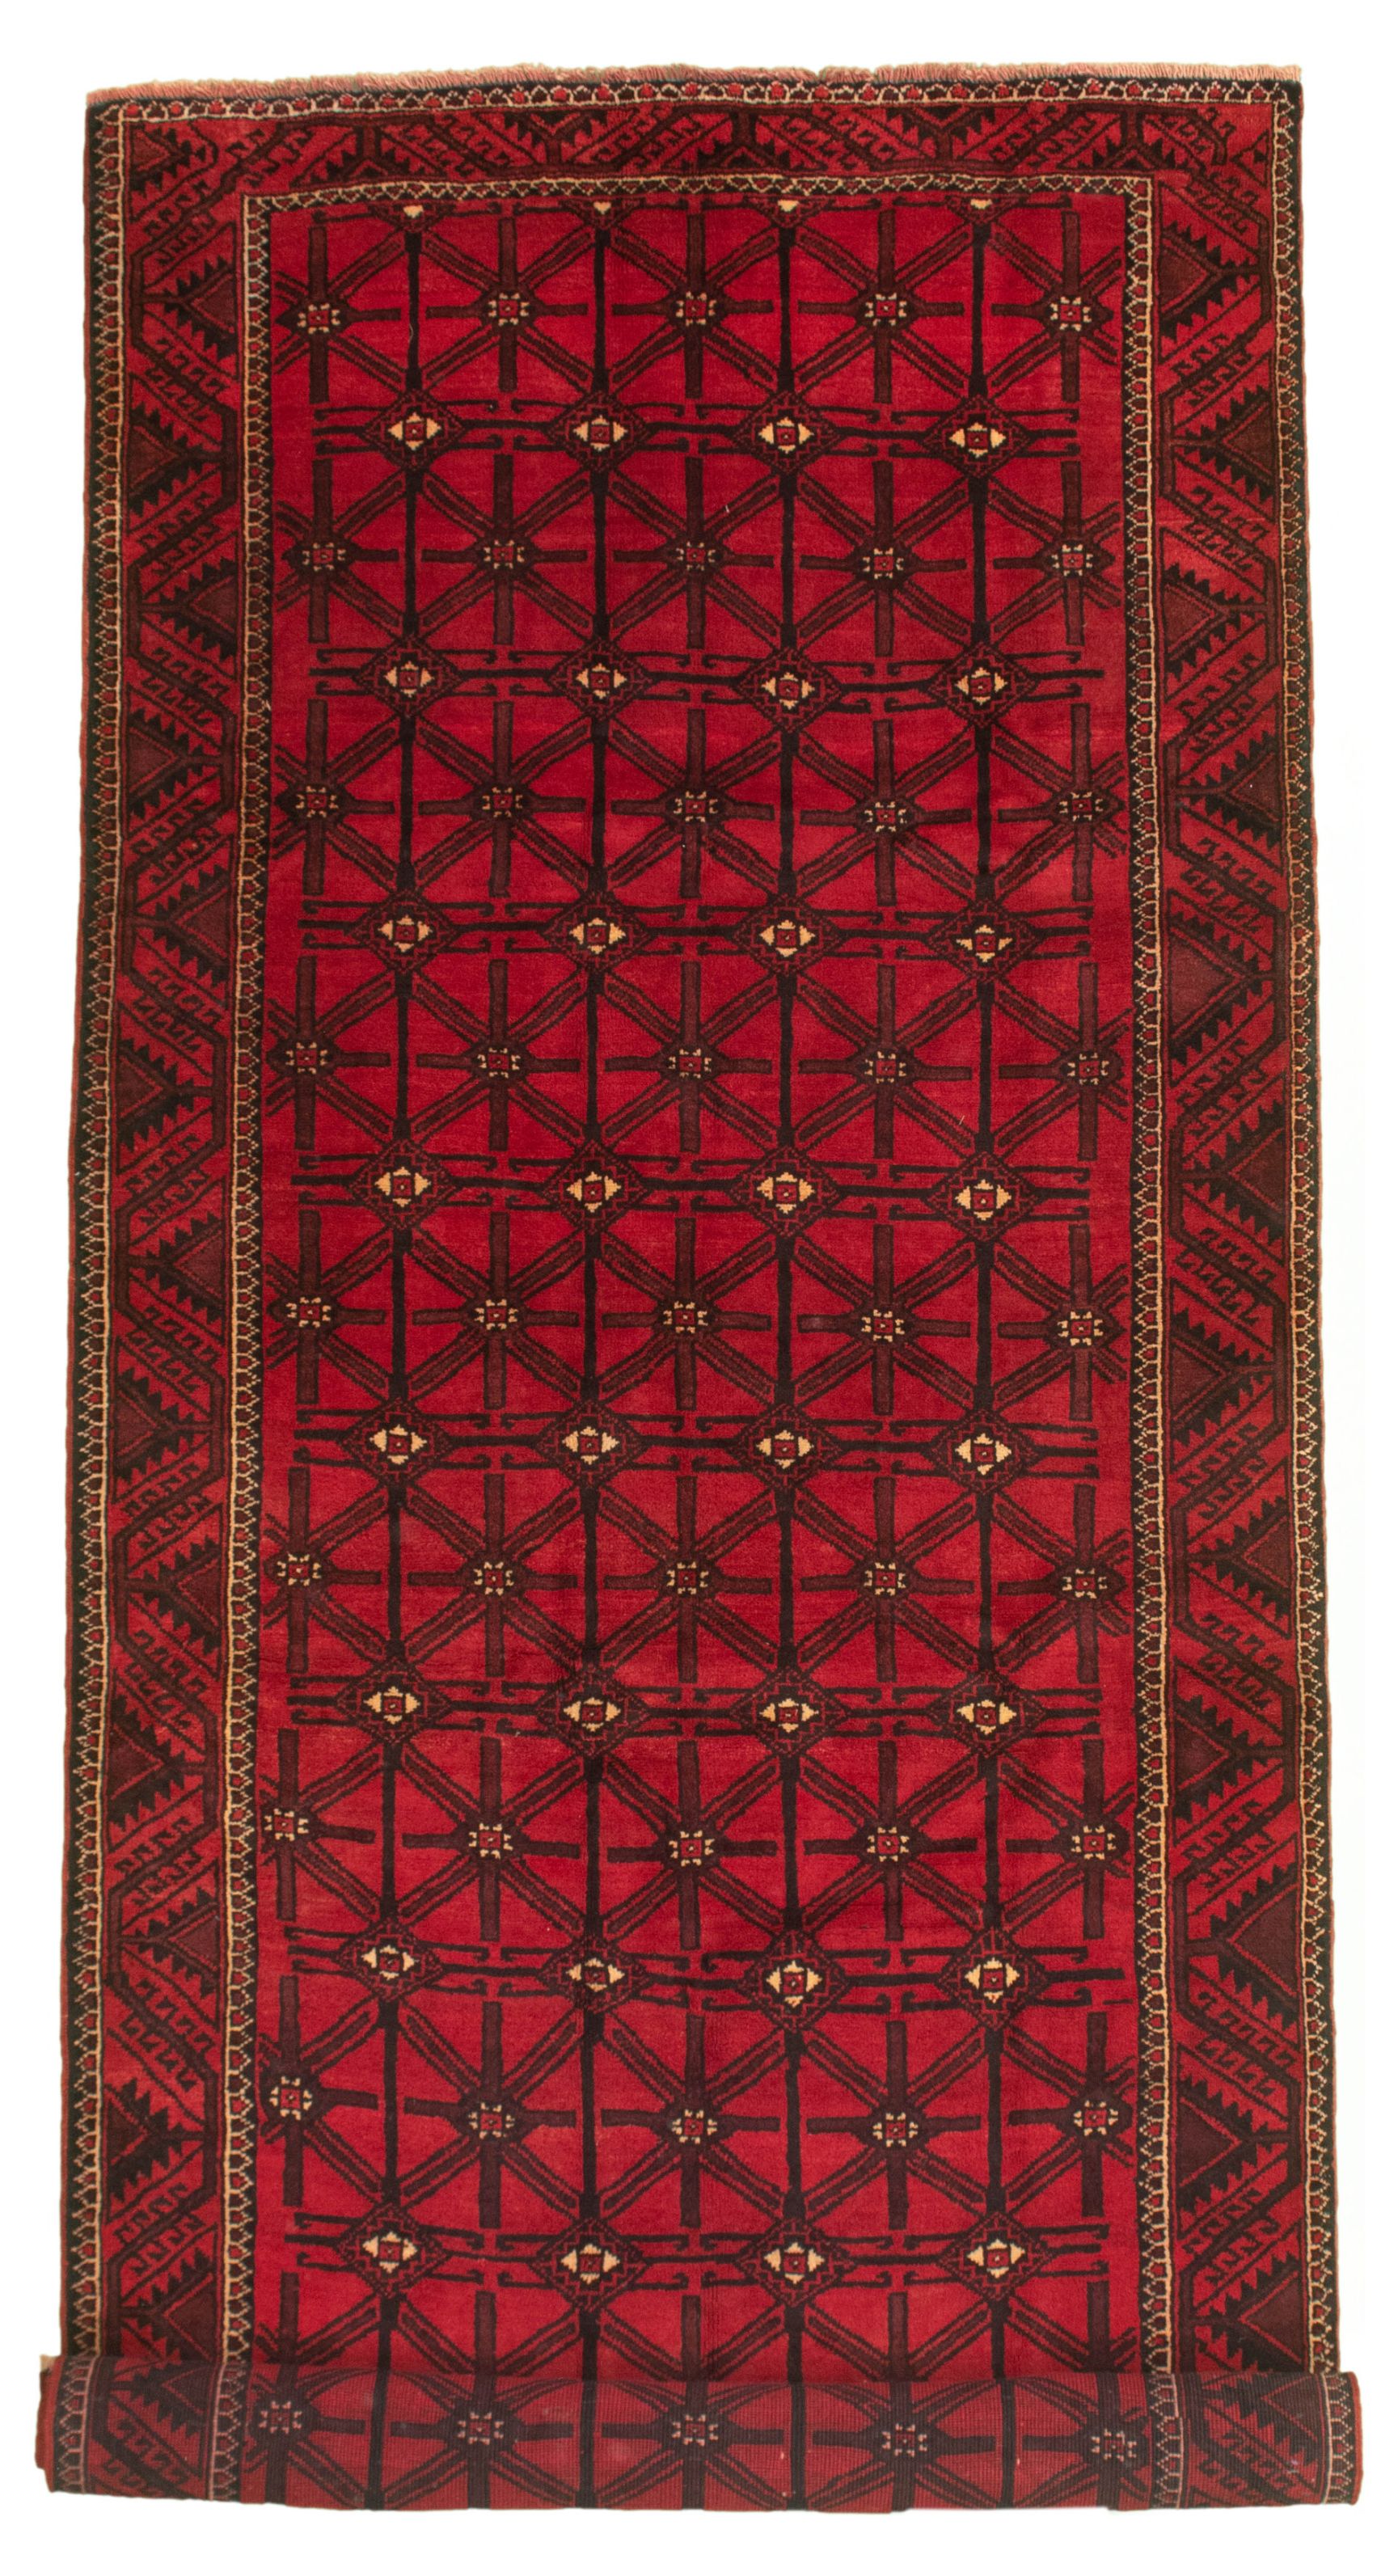 Hand-knotted Authentic Turkish Red Wool Rug 4'9" x 9'9"  Size: 4'9" x 9'9"  